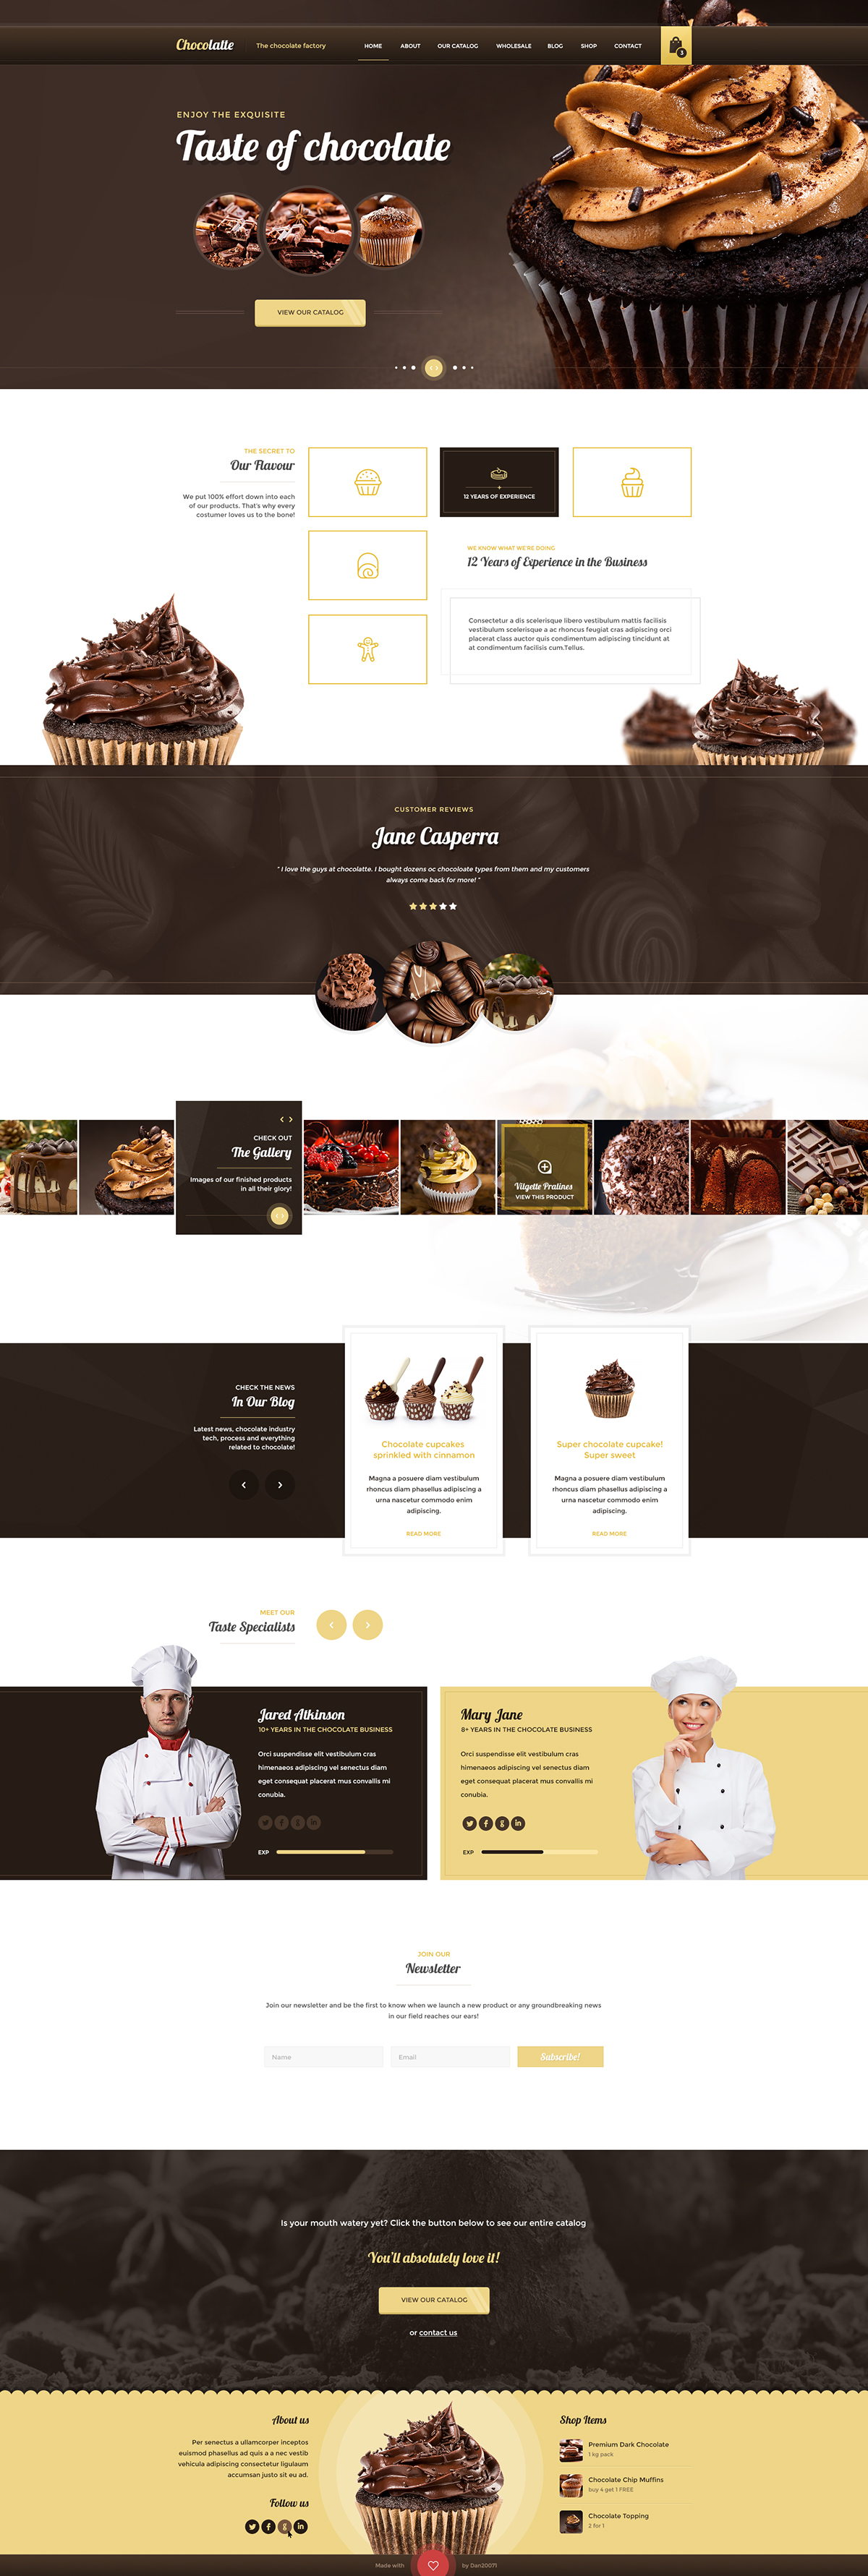 chocolate sweet photoshop design Layout chocolate factory clean modern minimalist images